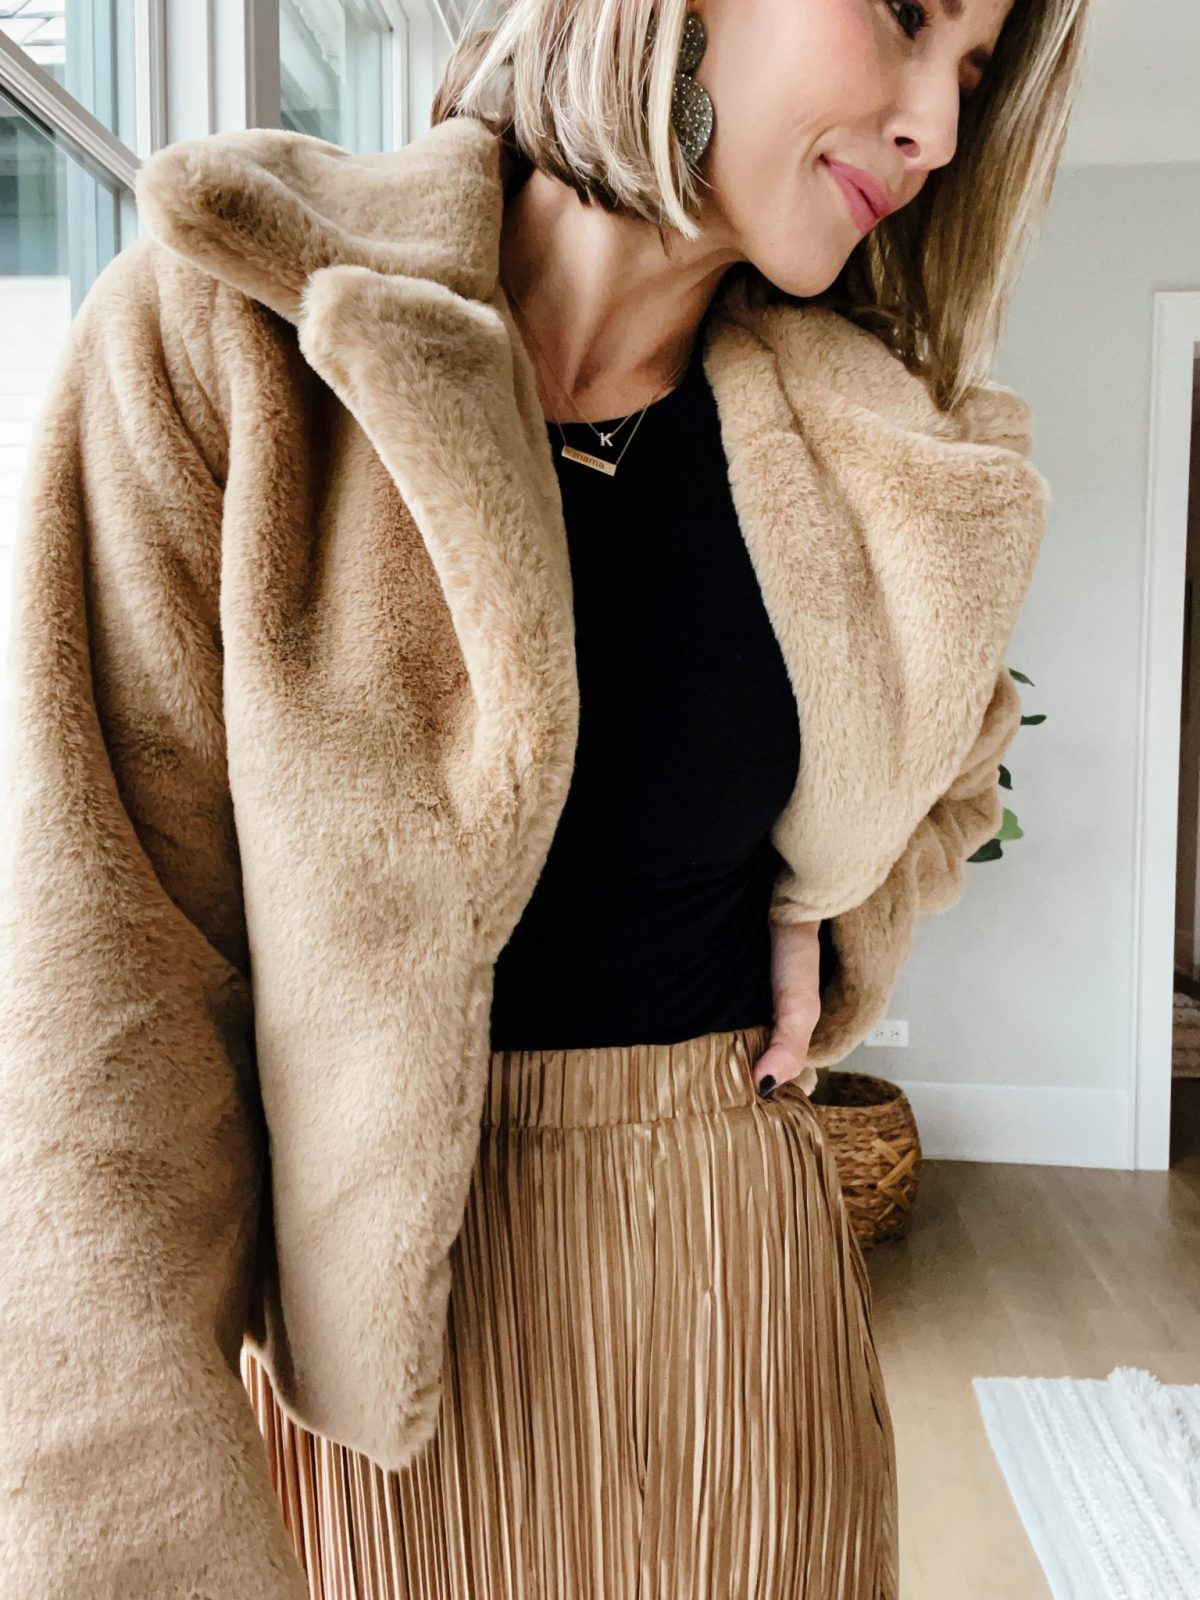 Thanksgiving outfit ideas: Suzanne wearing a faux fur jacket and gold pleated skirt